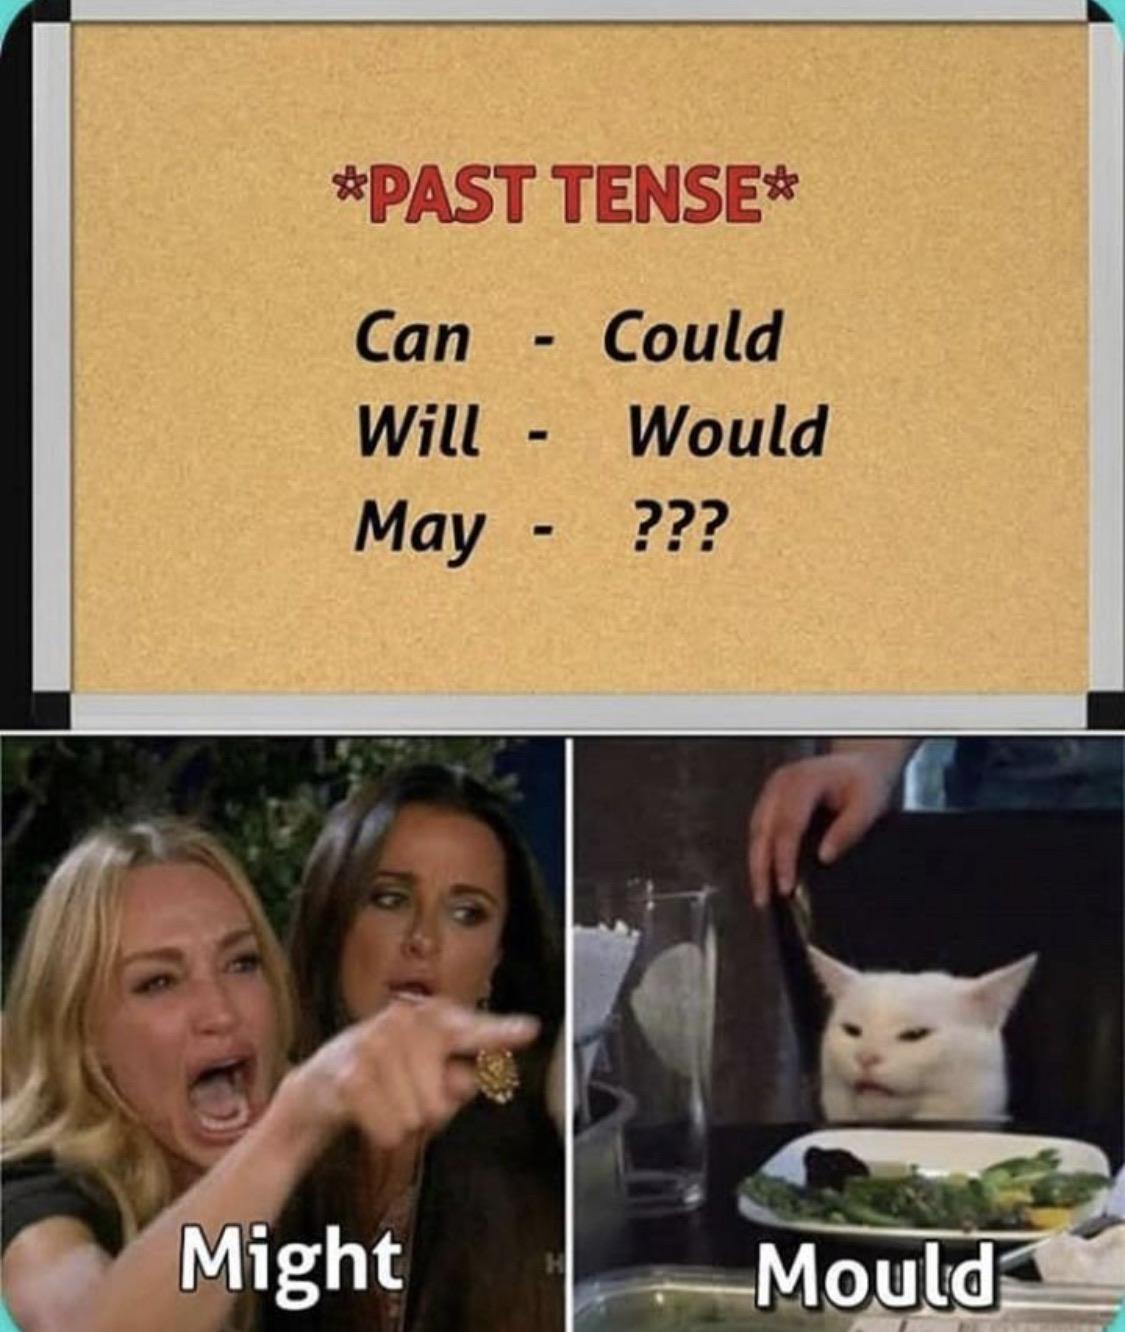 woman yelling at a cat meme that says 'past tense - can, could - will, would - may' and the woman is yelling 'might' and smudge the cat is saying 'mould'